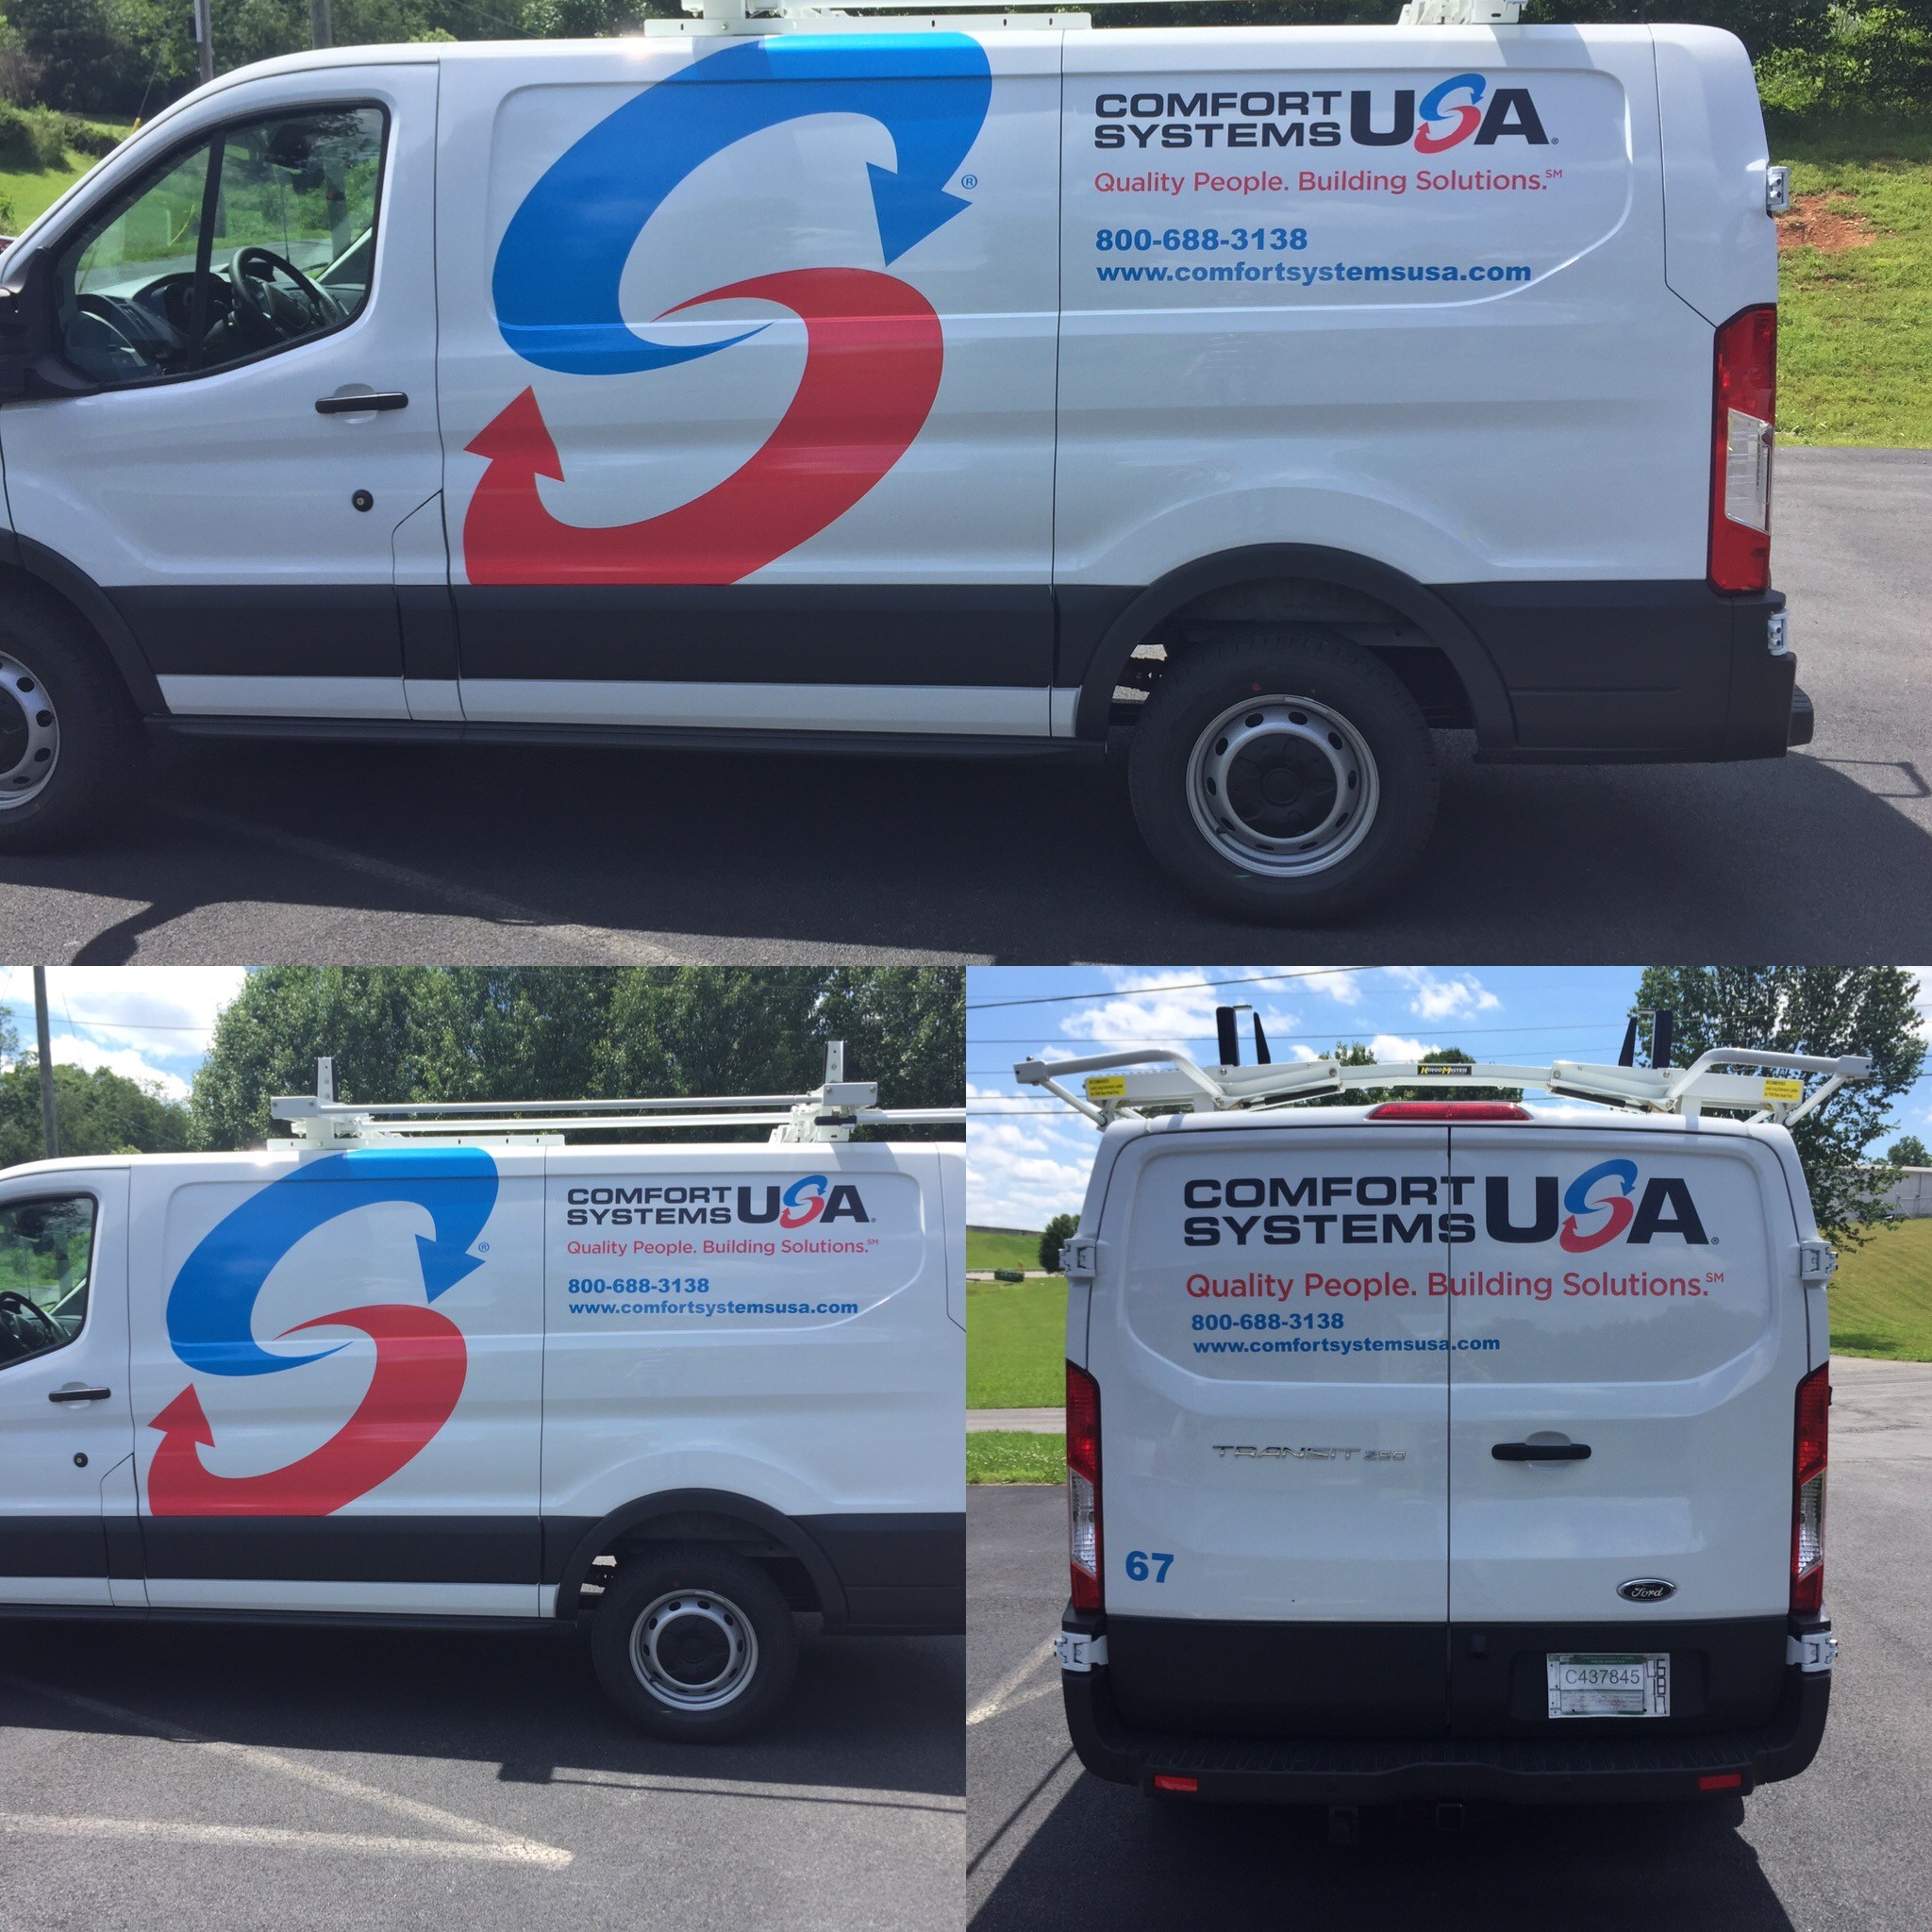 Comfort Systems USA vehicle decals